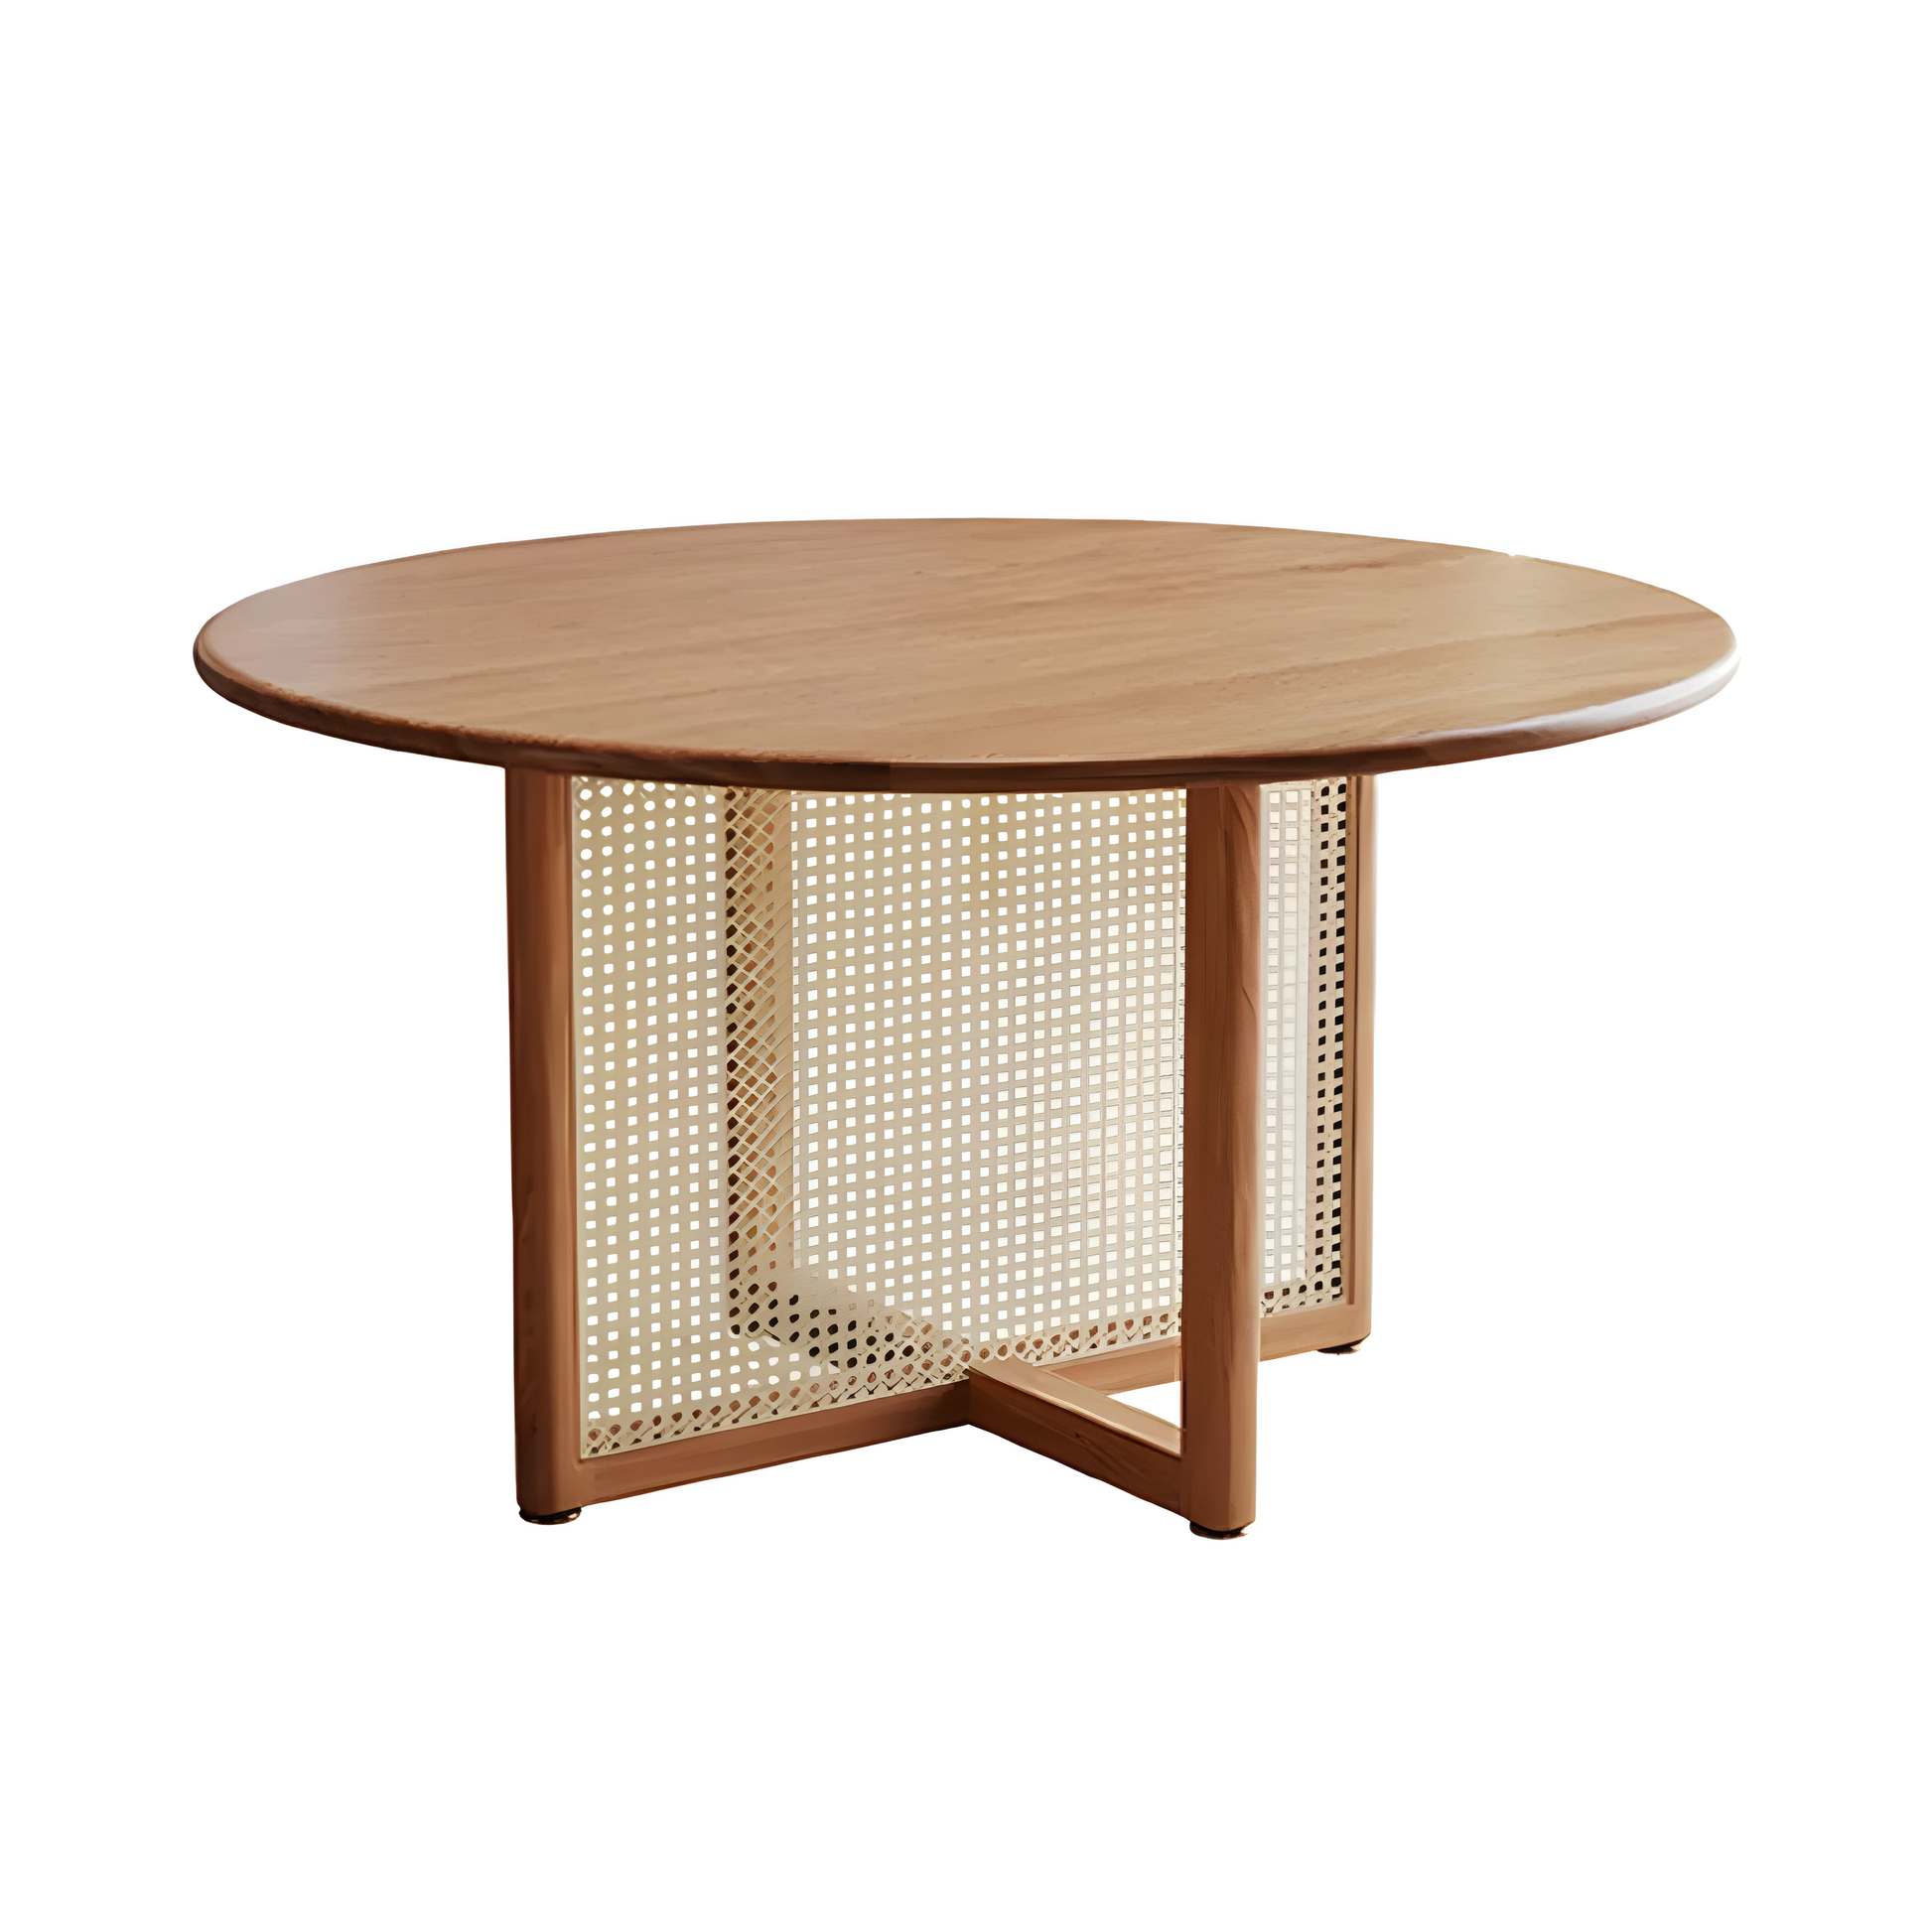 Ozell Dining Table